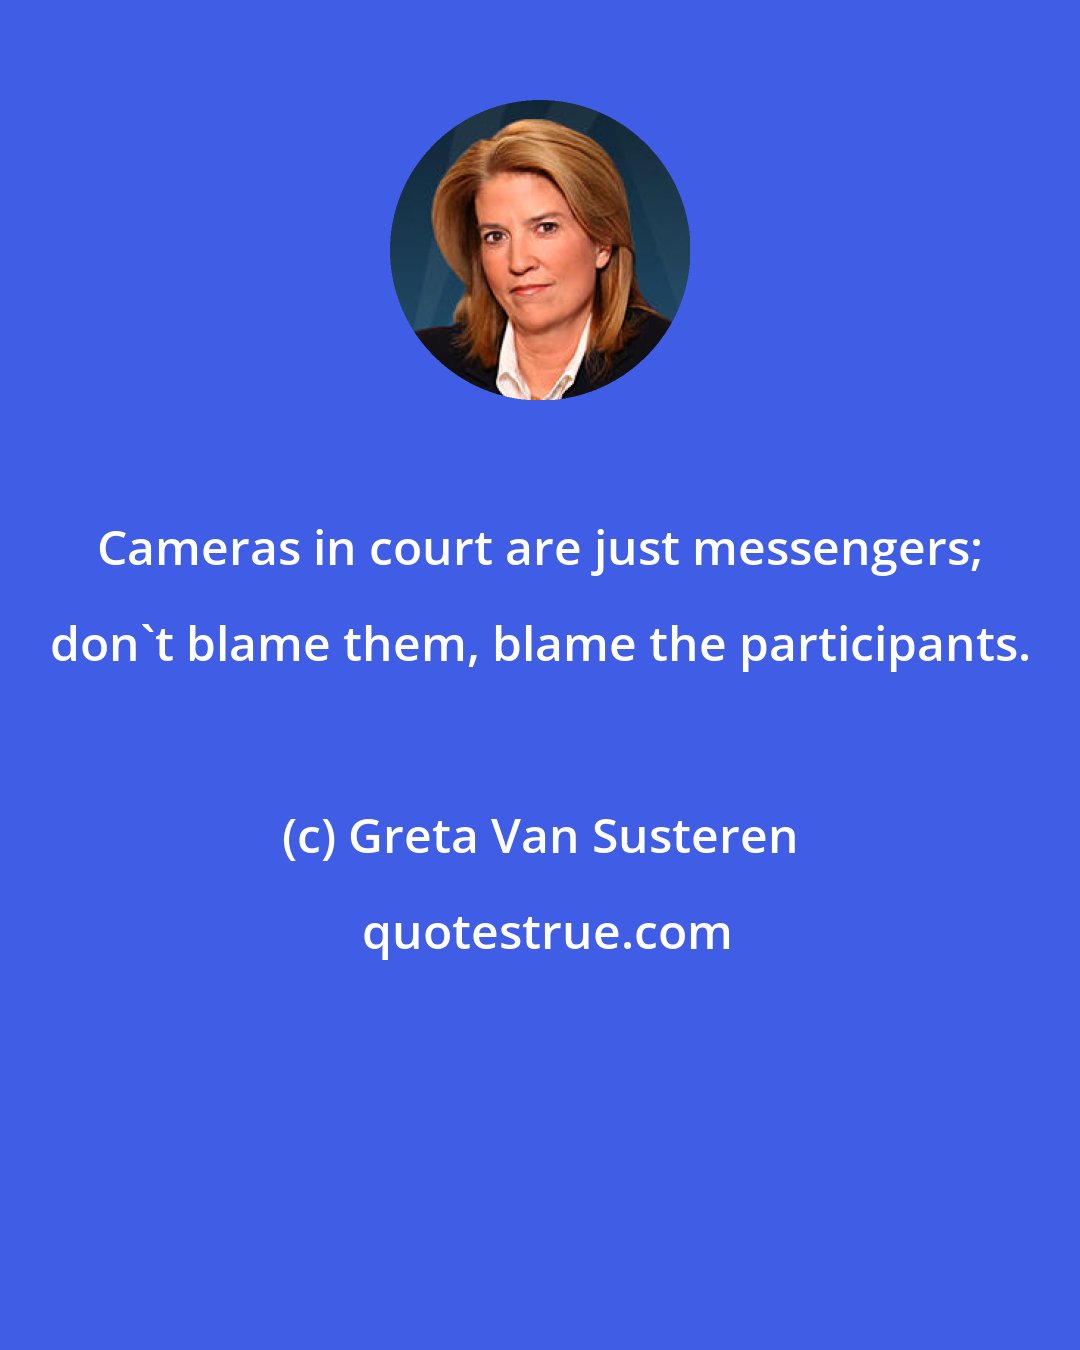 Greta Van Susteren: Cameras in court are just messengers; don't blame them, blame the participants.